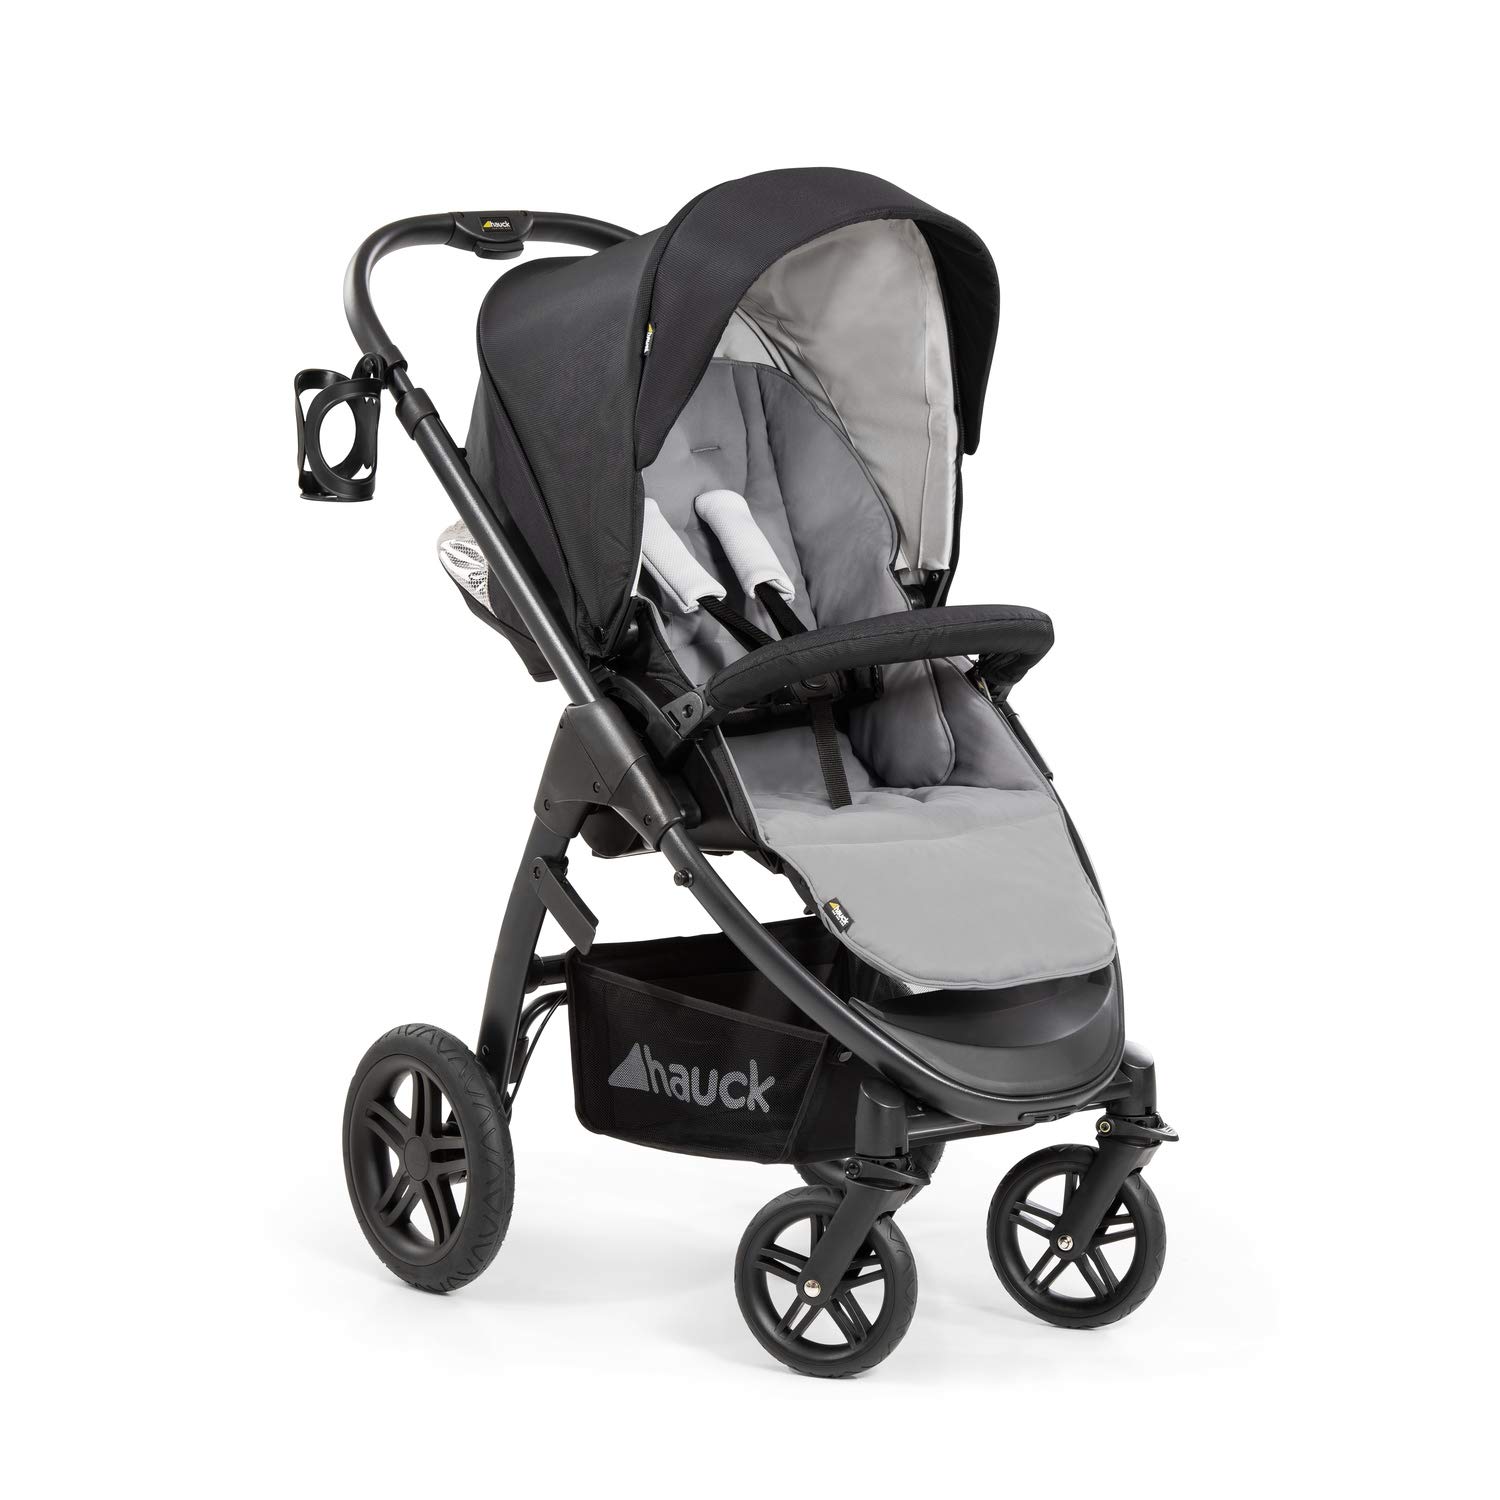 Hauck Saturn R All-Terrain Sport Pram + Leg Cover, Rotatable, up to 25 kg, XL Hood, Cup Holder, Height-Adjustable, Compact Foldable, Compatible with Baby Carrycot & Baby Seat